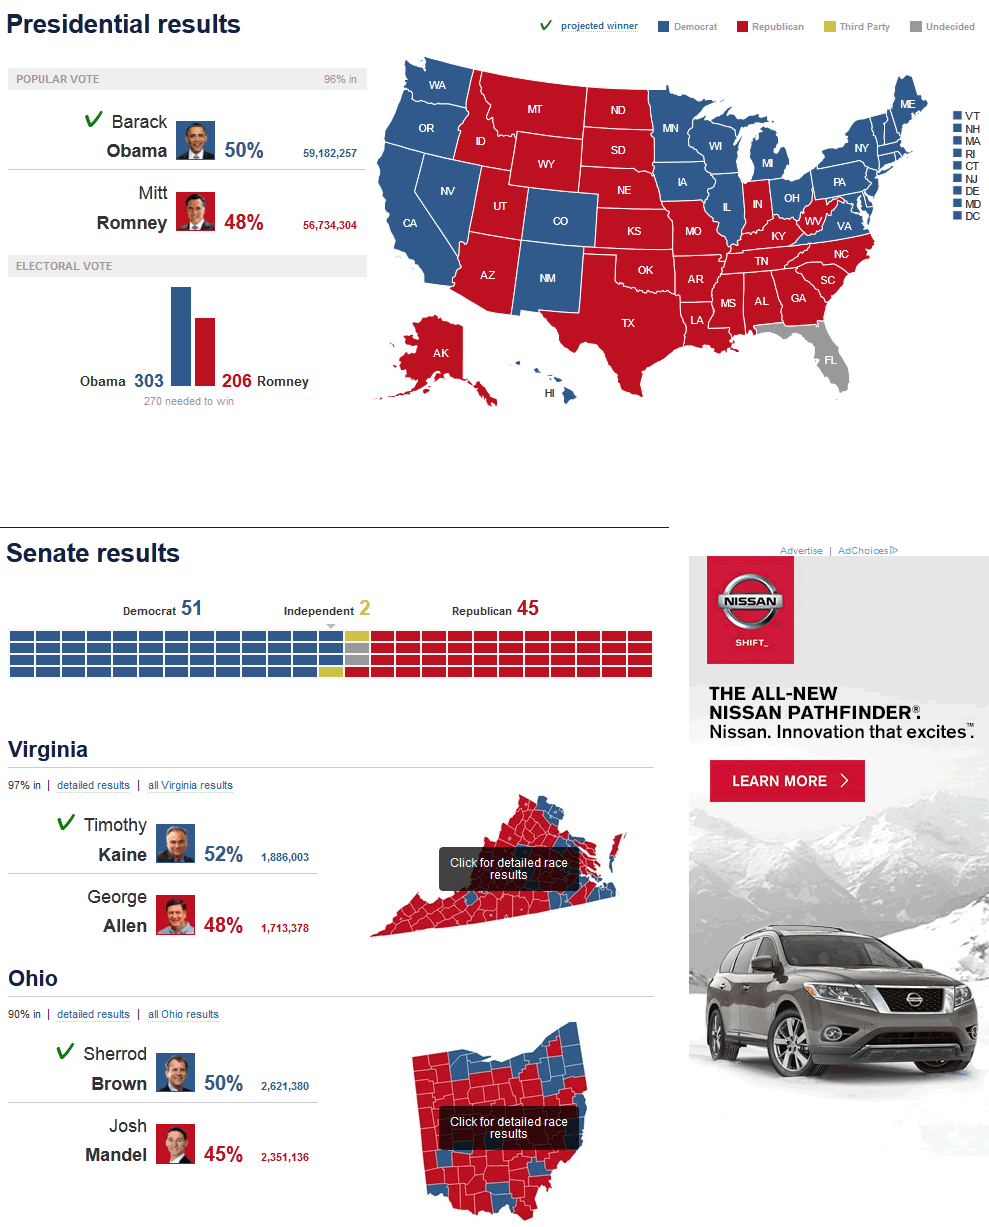 MSNBC 2012 US Presidential Election Results Map